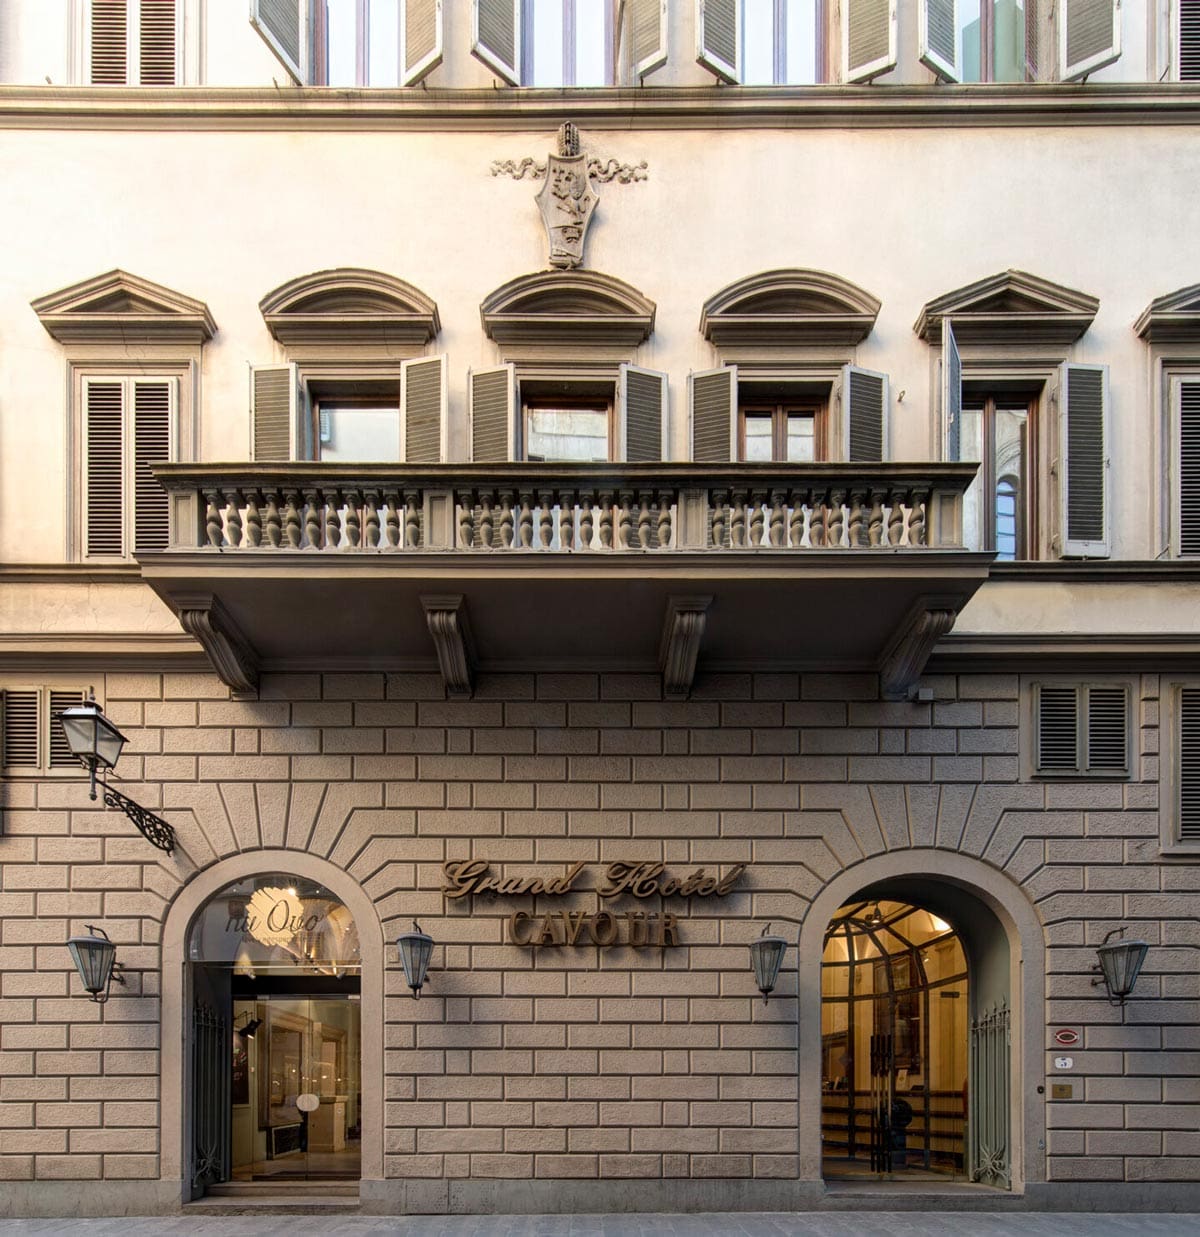 The grand entrance to Grand Hotel Cavour.